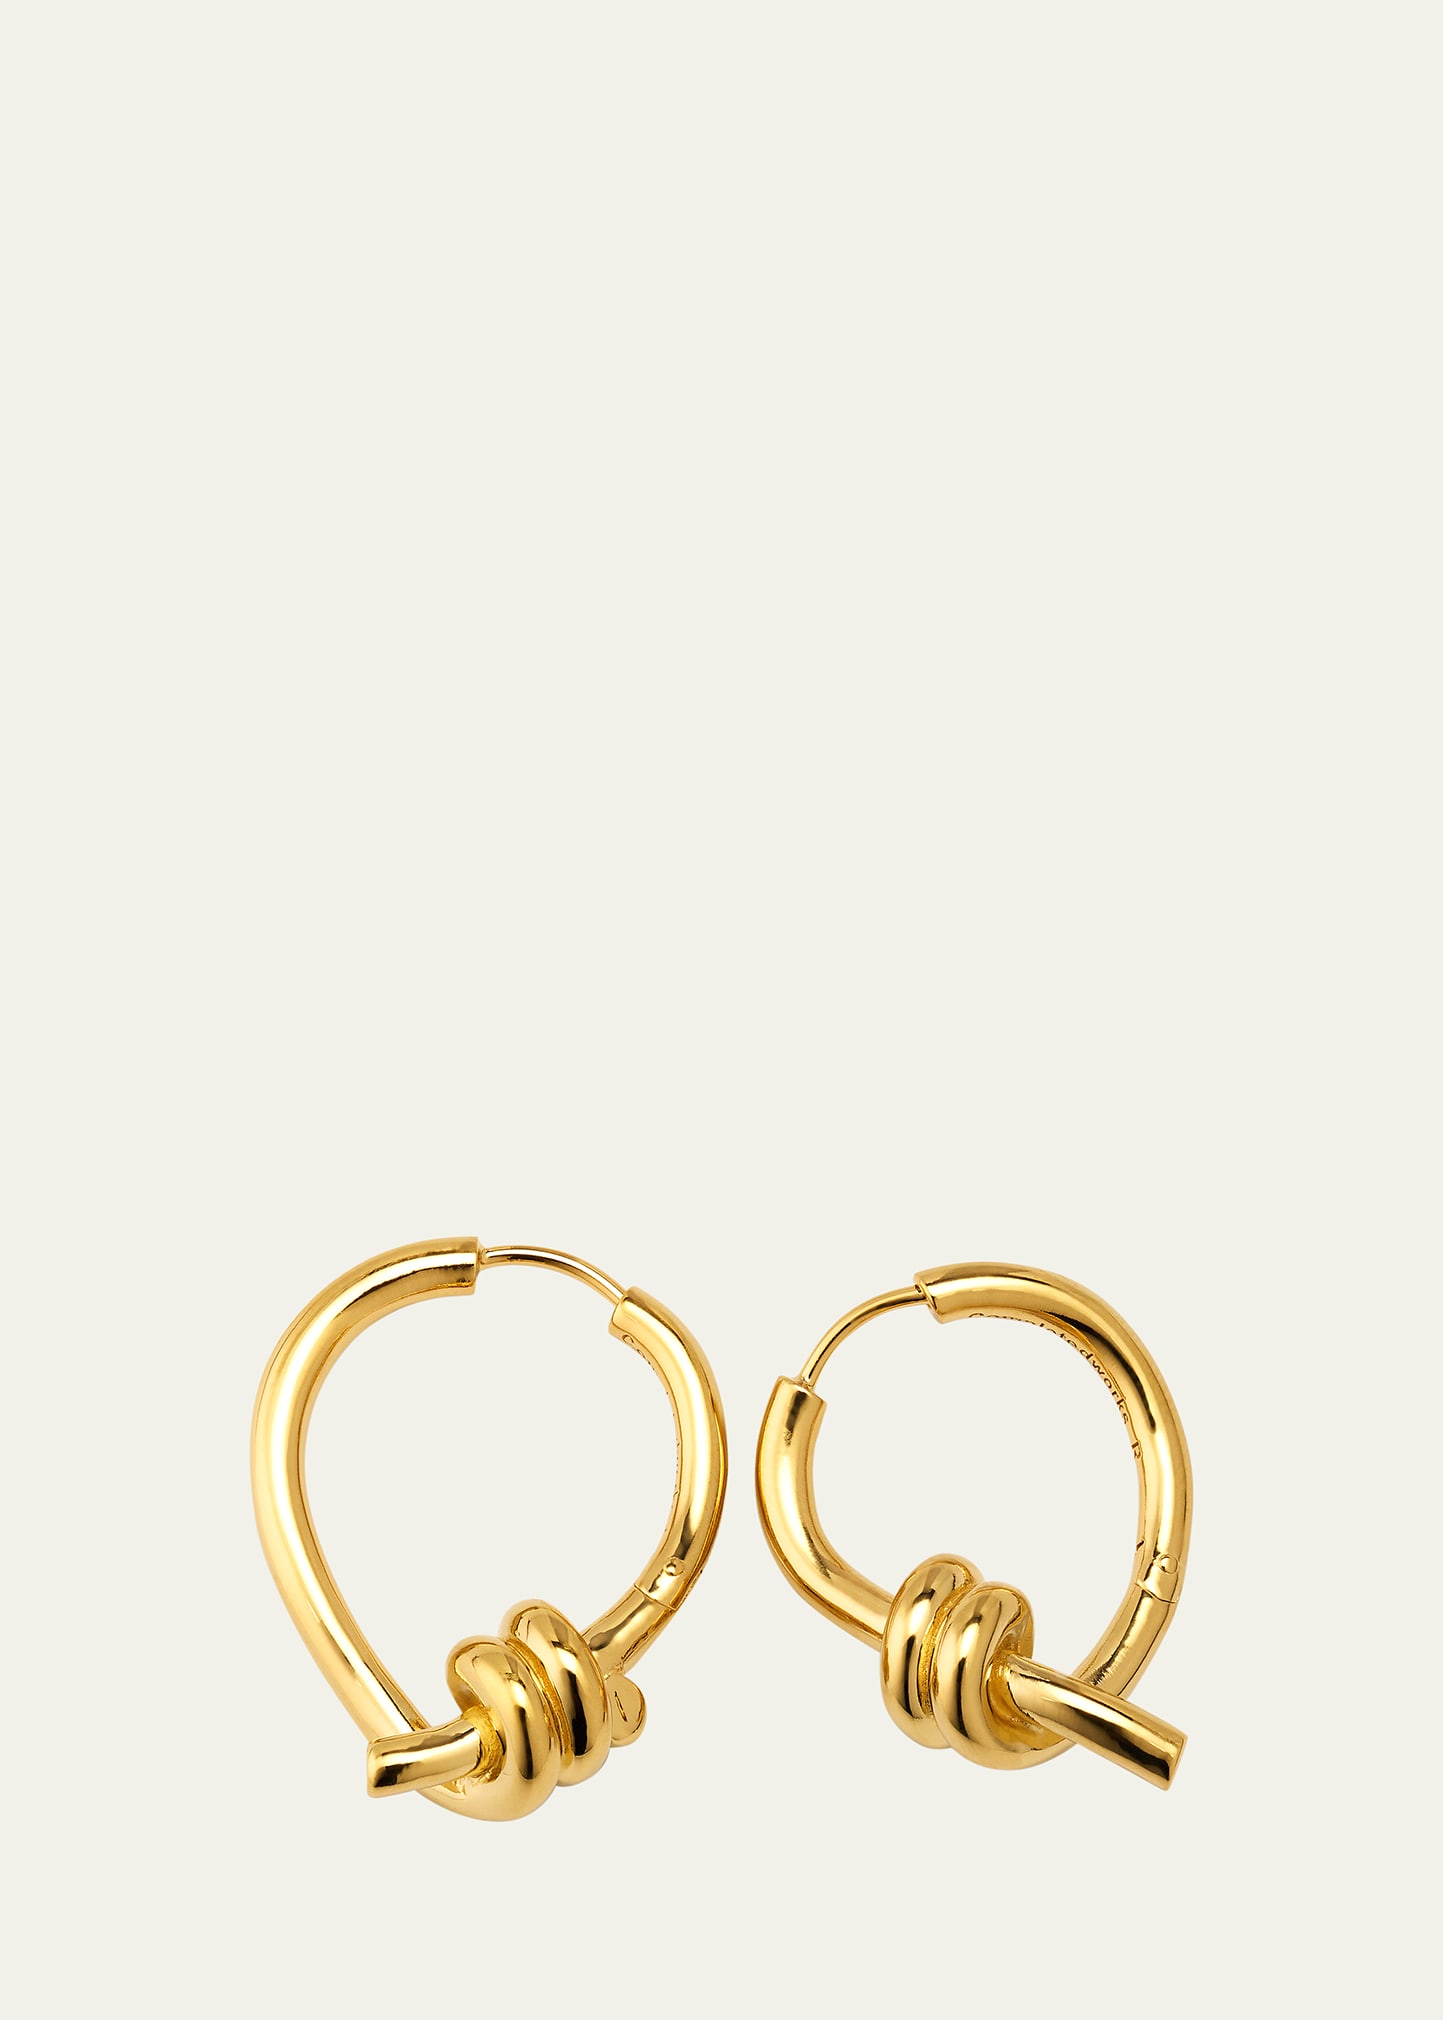 Completedworks The Freedom To Imagine Ii Earrings In Gold